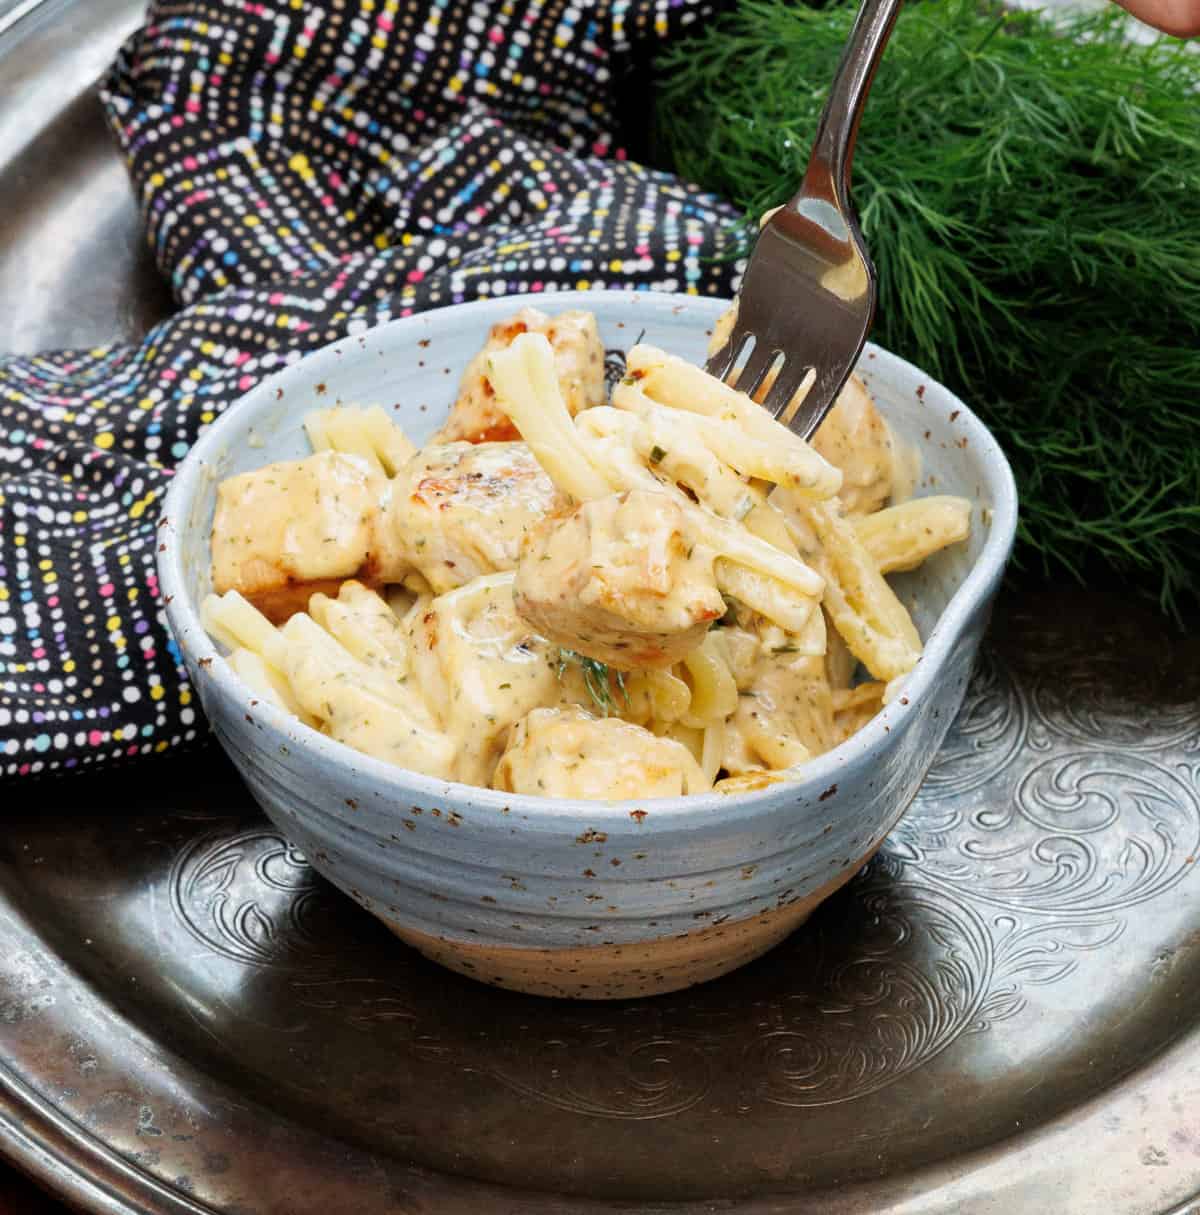 a fork filled with pasta and chicken over a blue bowl.